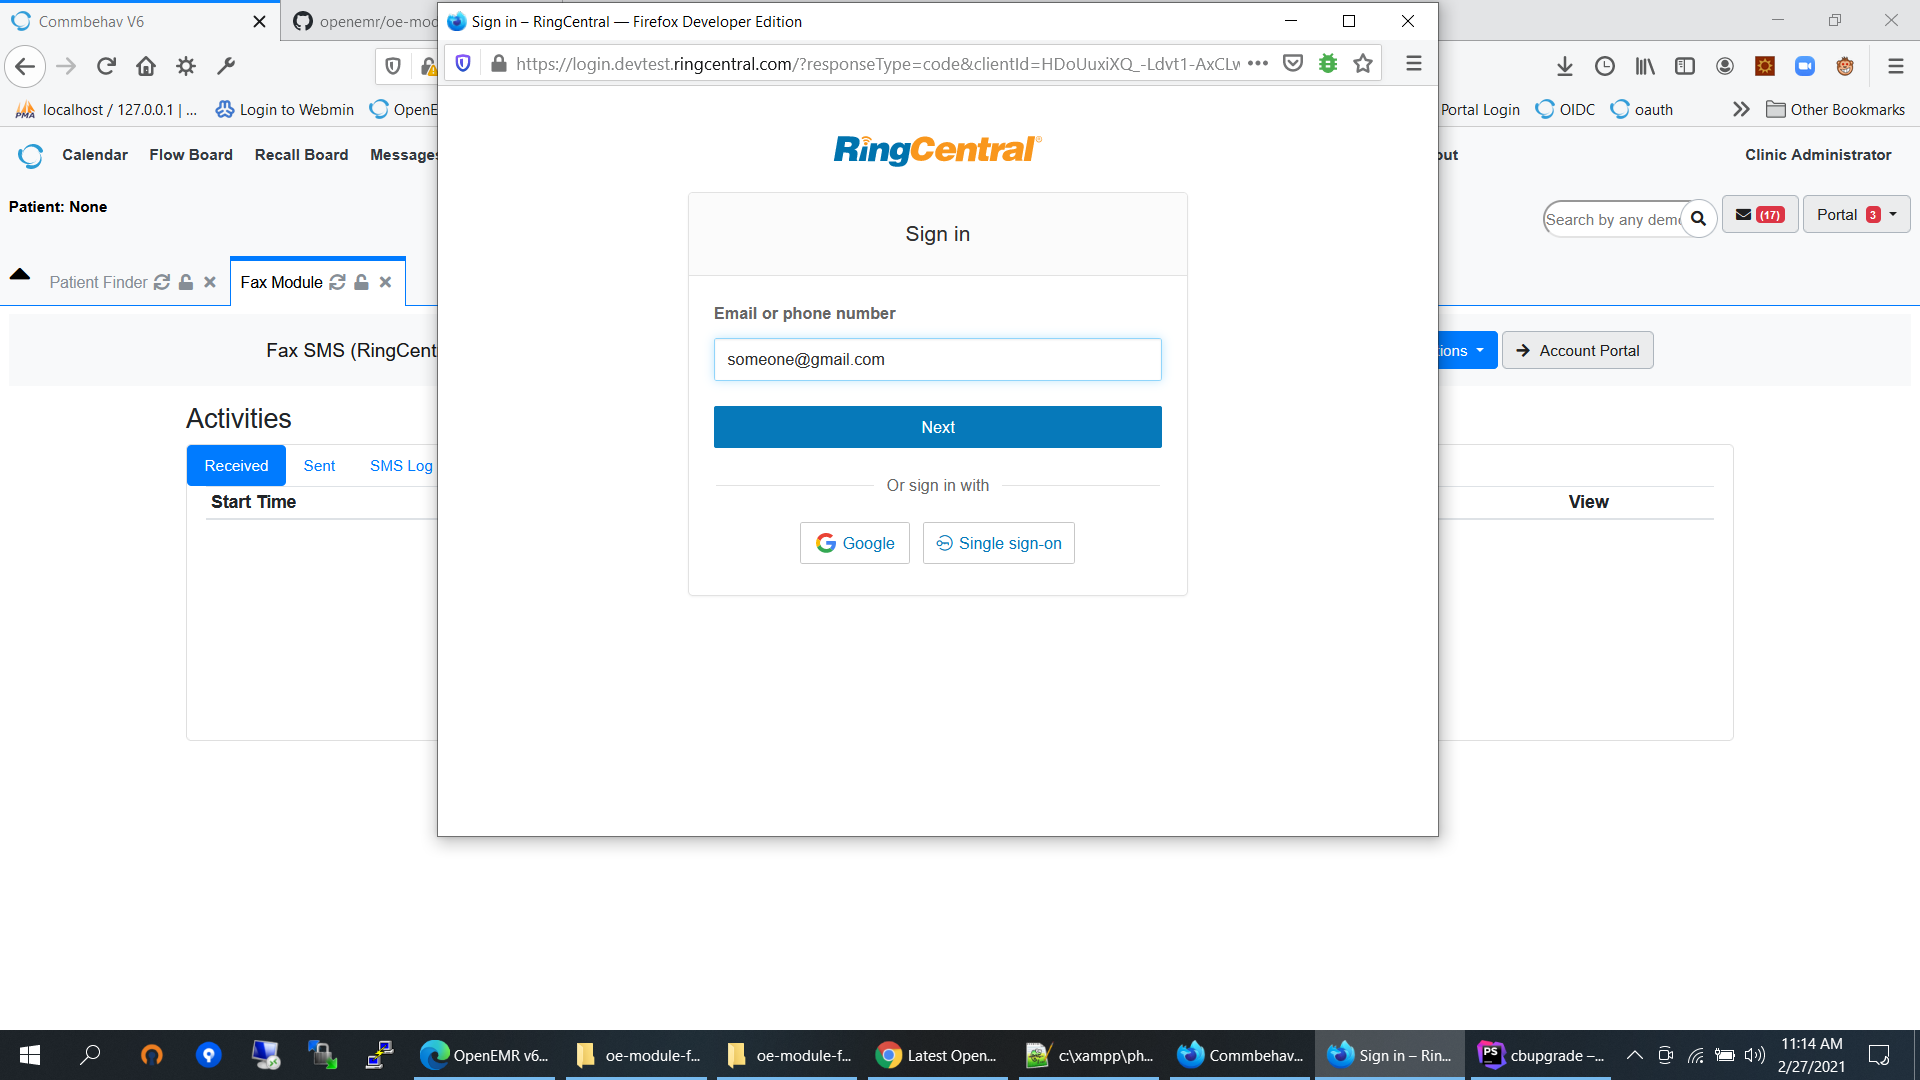 RingCentral Office GSuite Edition - Google Workspace Marketplace